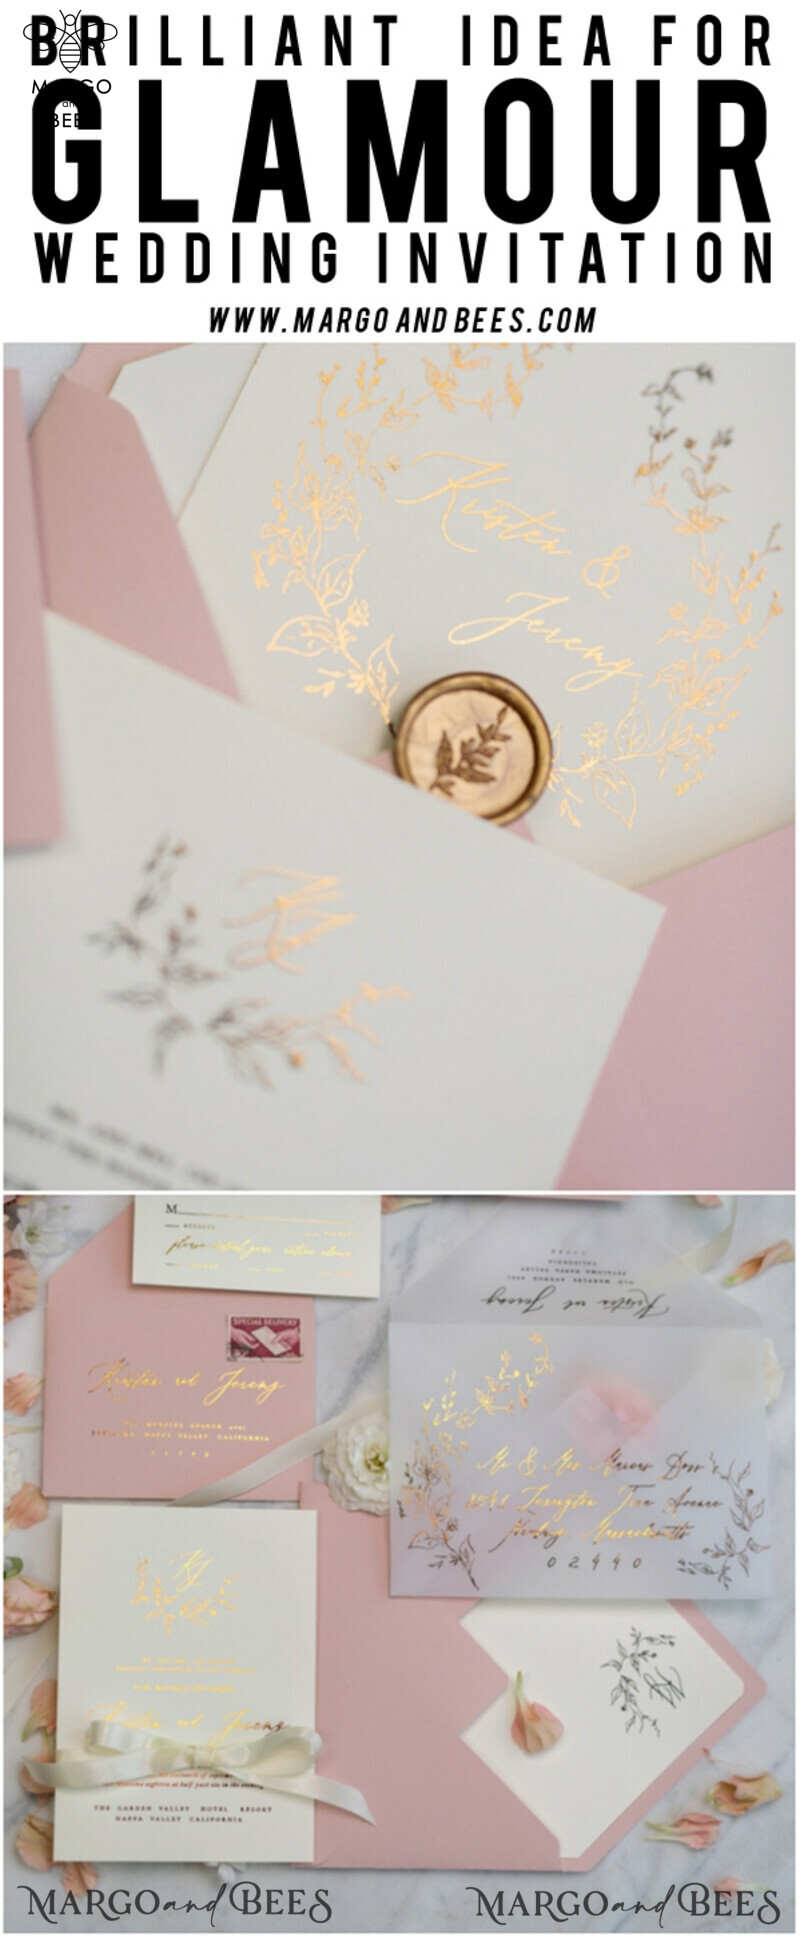 Stunning Blush Pink Wedding Invitations with Glamourous Gold Foil Accents and Elegant Vellum Details: A Bespoke Wedding Invitation Suite-36